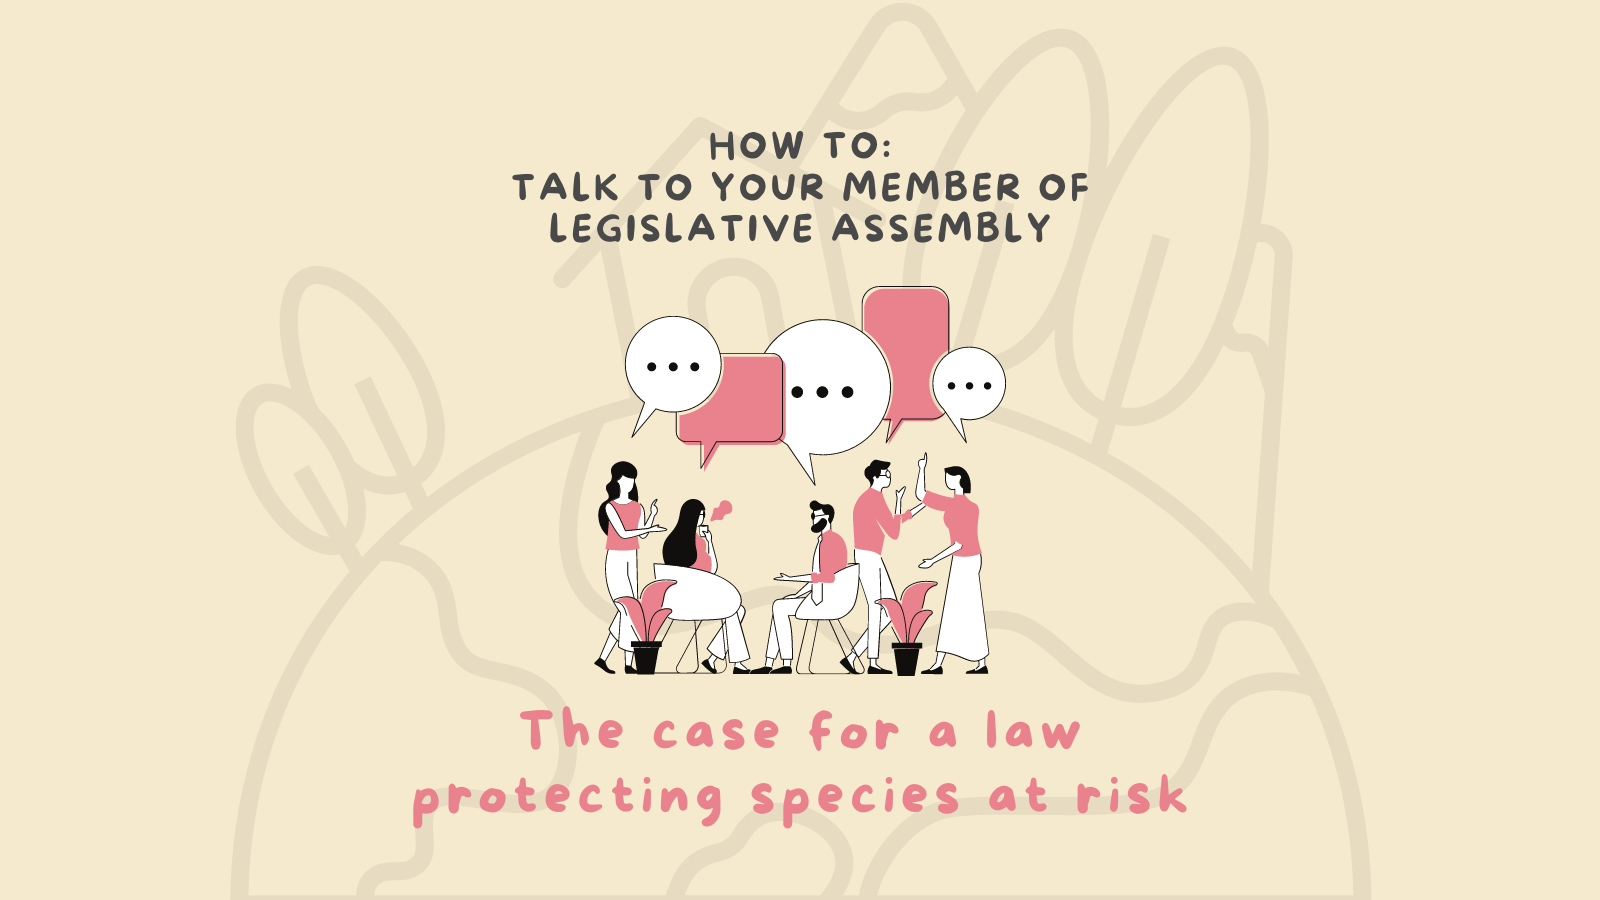 Illustration of a group of people talking to eachother. Text on the image says "how to talk to your member of legislative assembly. Case for a law protecting species at risk." End of image description.